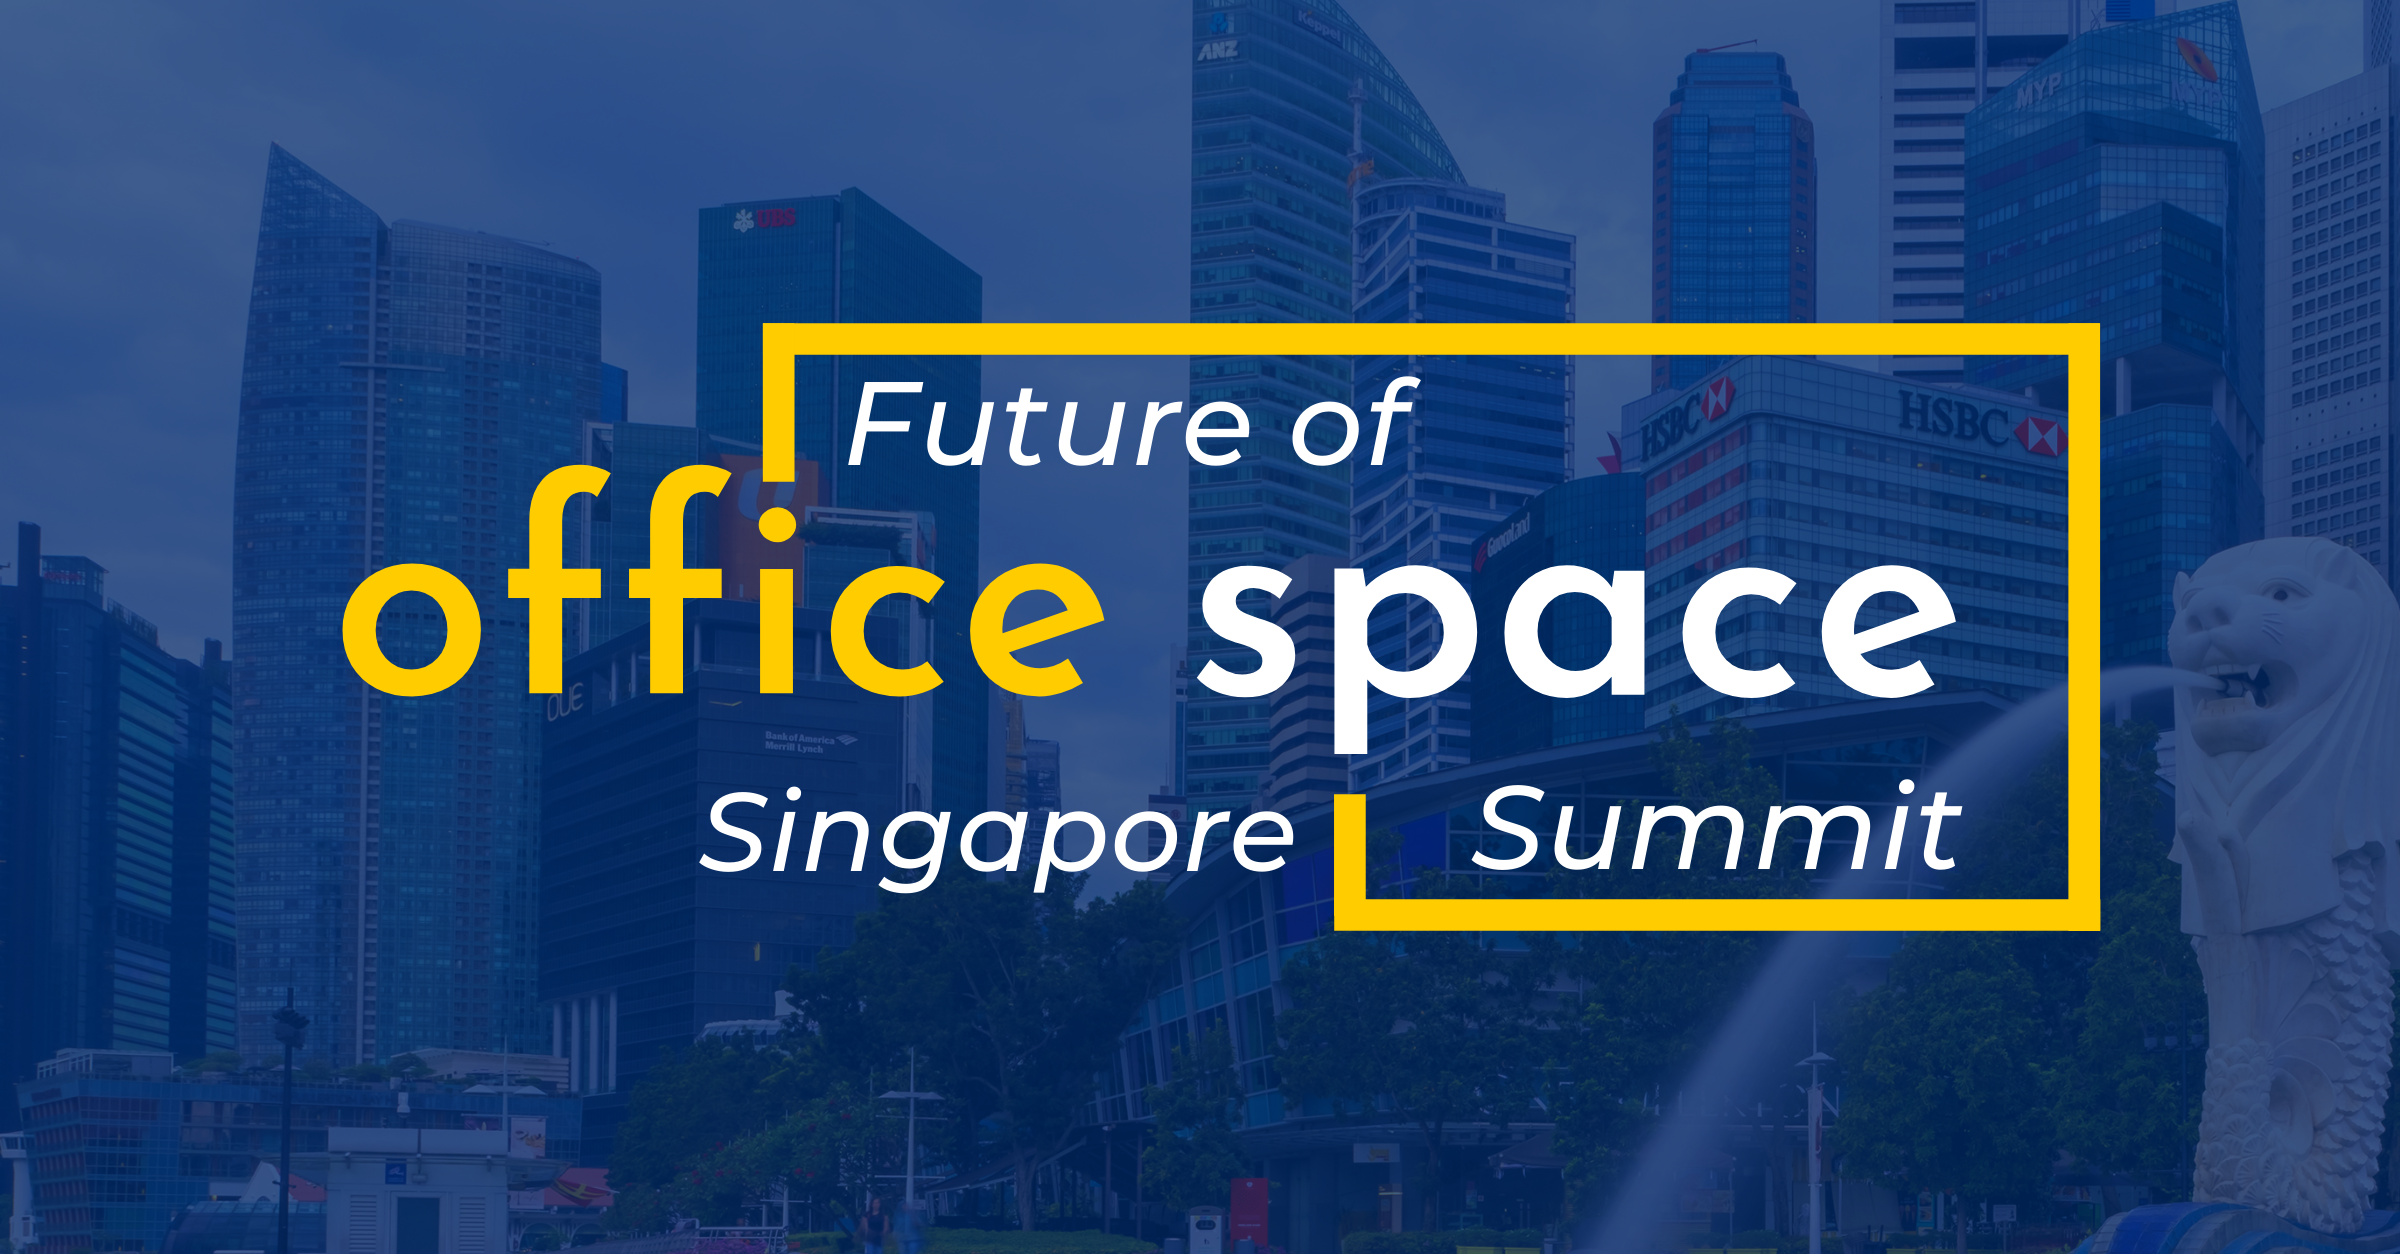 Future of Office Space Singapore Summit: 12 October 2022